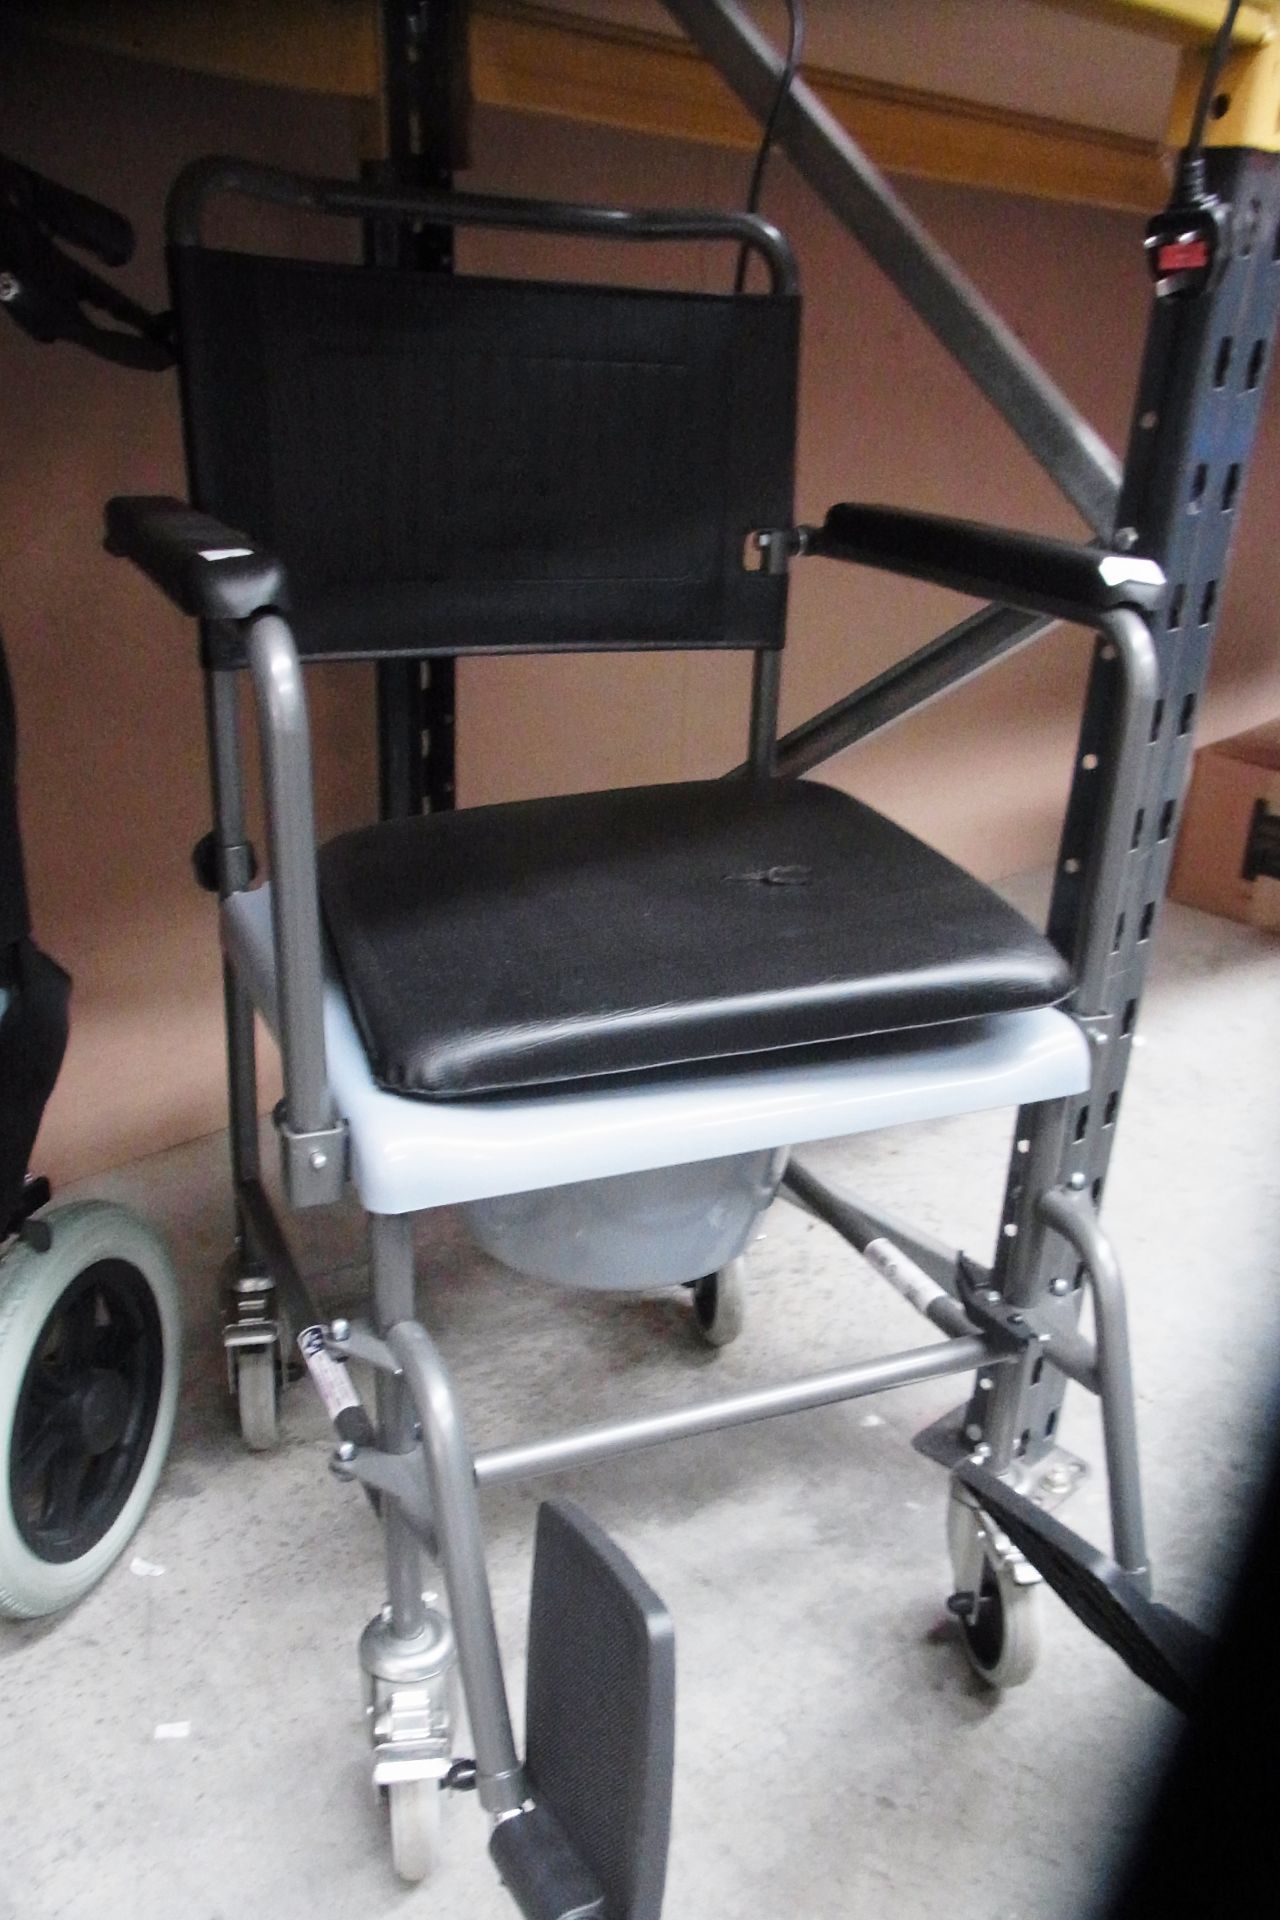 An Invacare four wheel mobility chair